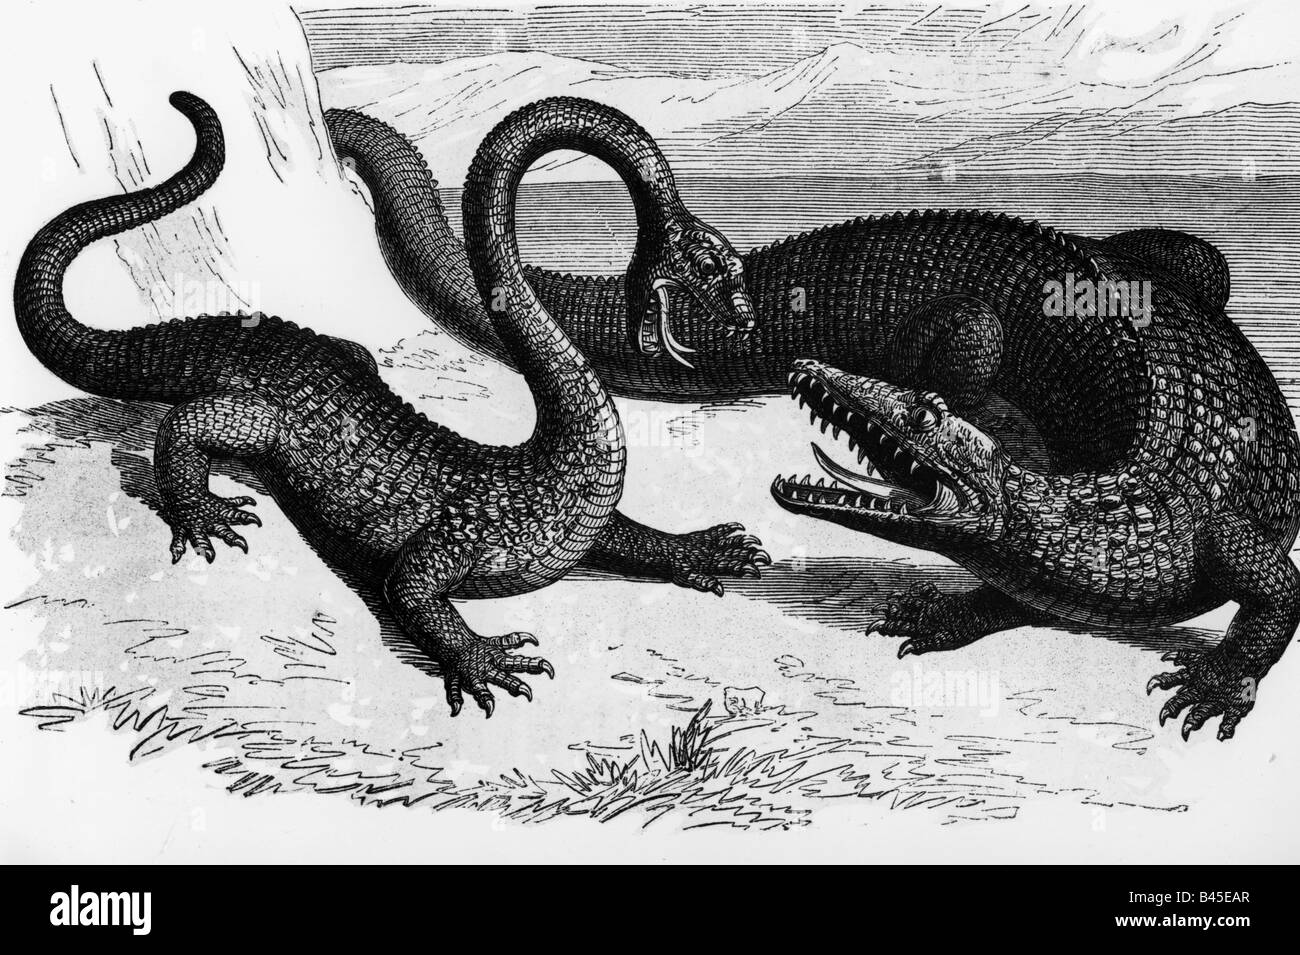 superstition, mythical creatures, dragons, fighting dragons, wood engraving, 19th century, reptiles, crocodile, dragon, zoology, historic, historical, Stock Photo